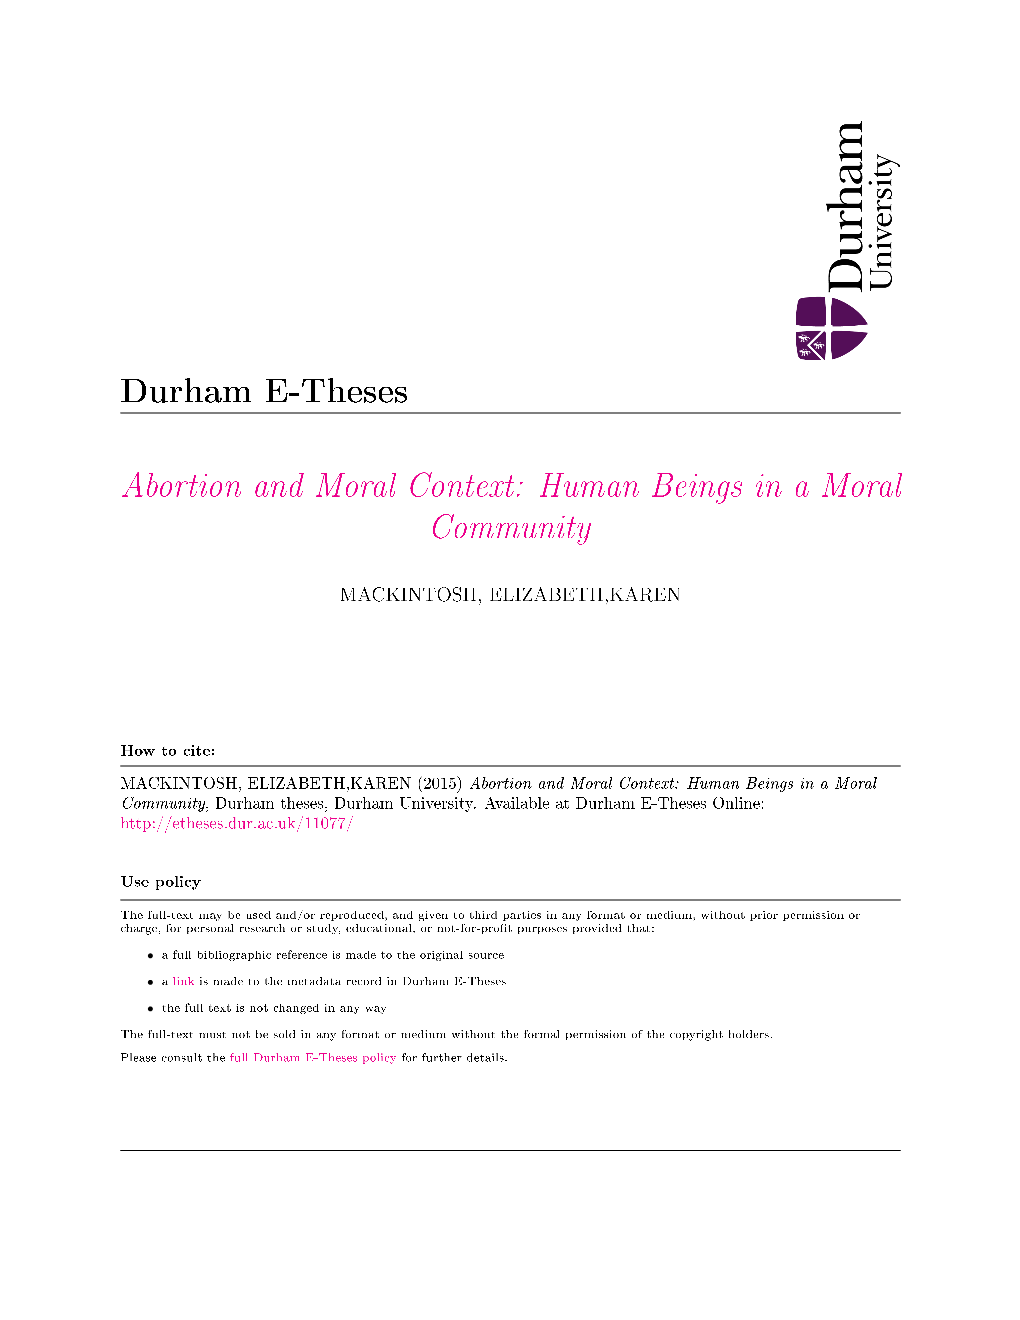 Abortion and Moral Context: Human Beings in a Moral Community